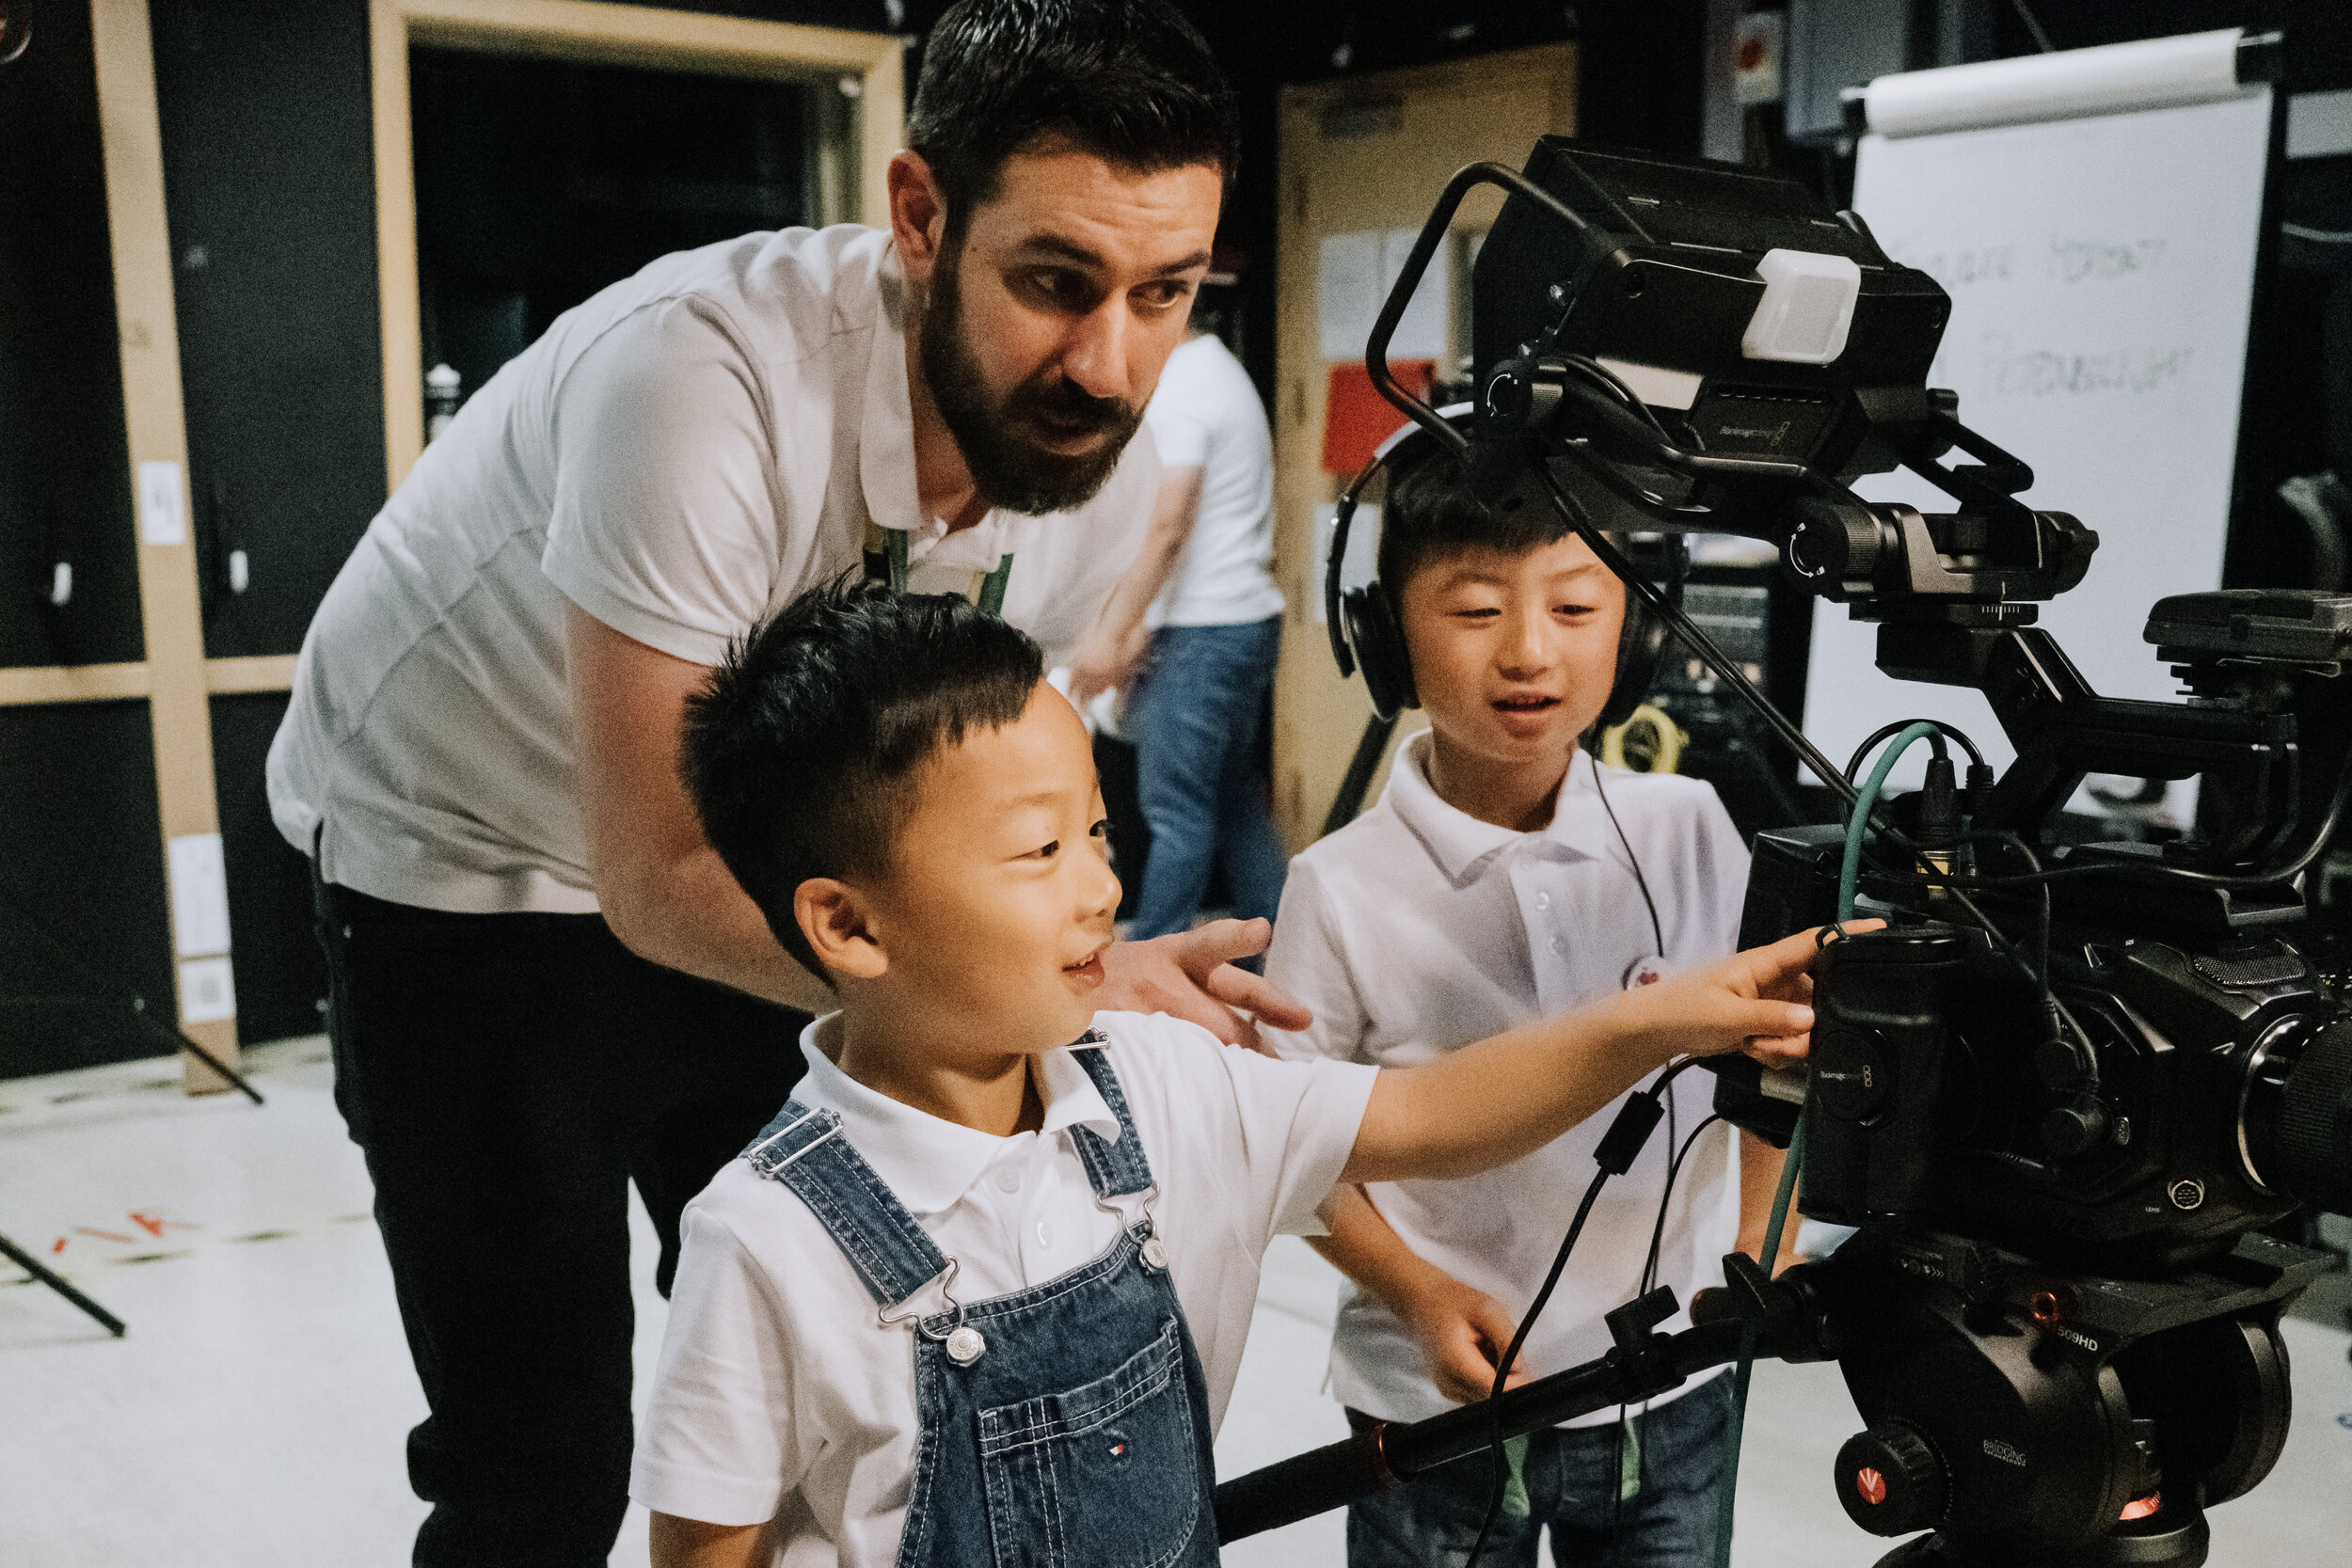 One adult man with dark hair and a slight beard is teaching two children how to operate a professional camera. One of the children is wearing over-ear headphones while they do this.